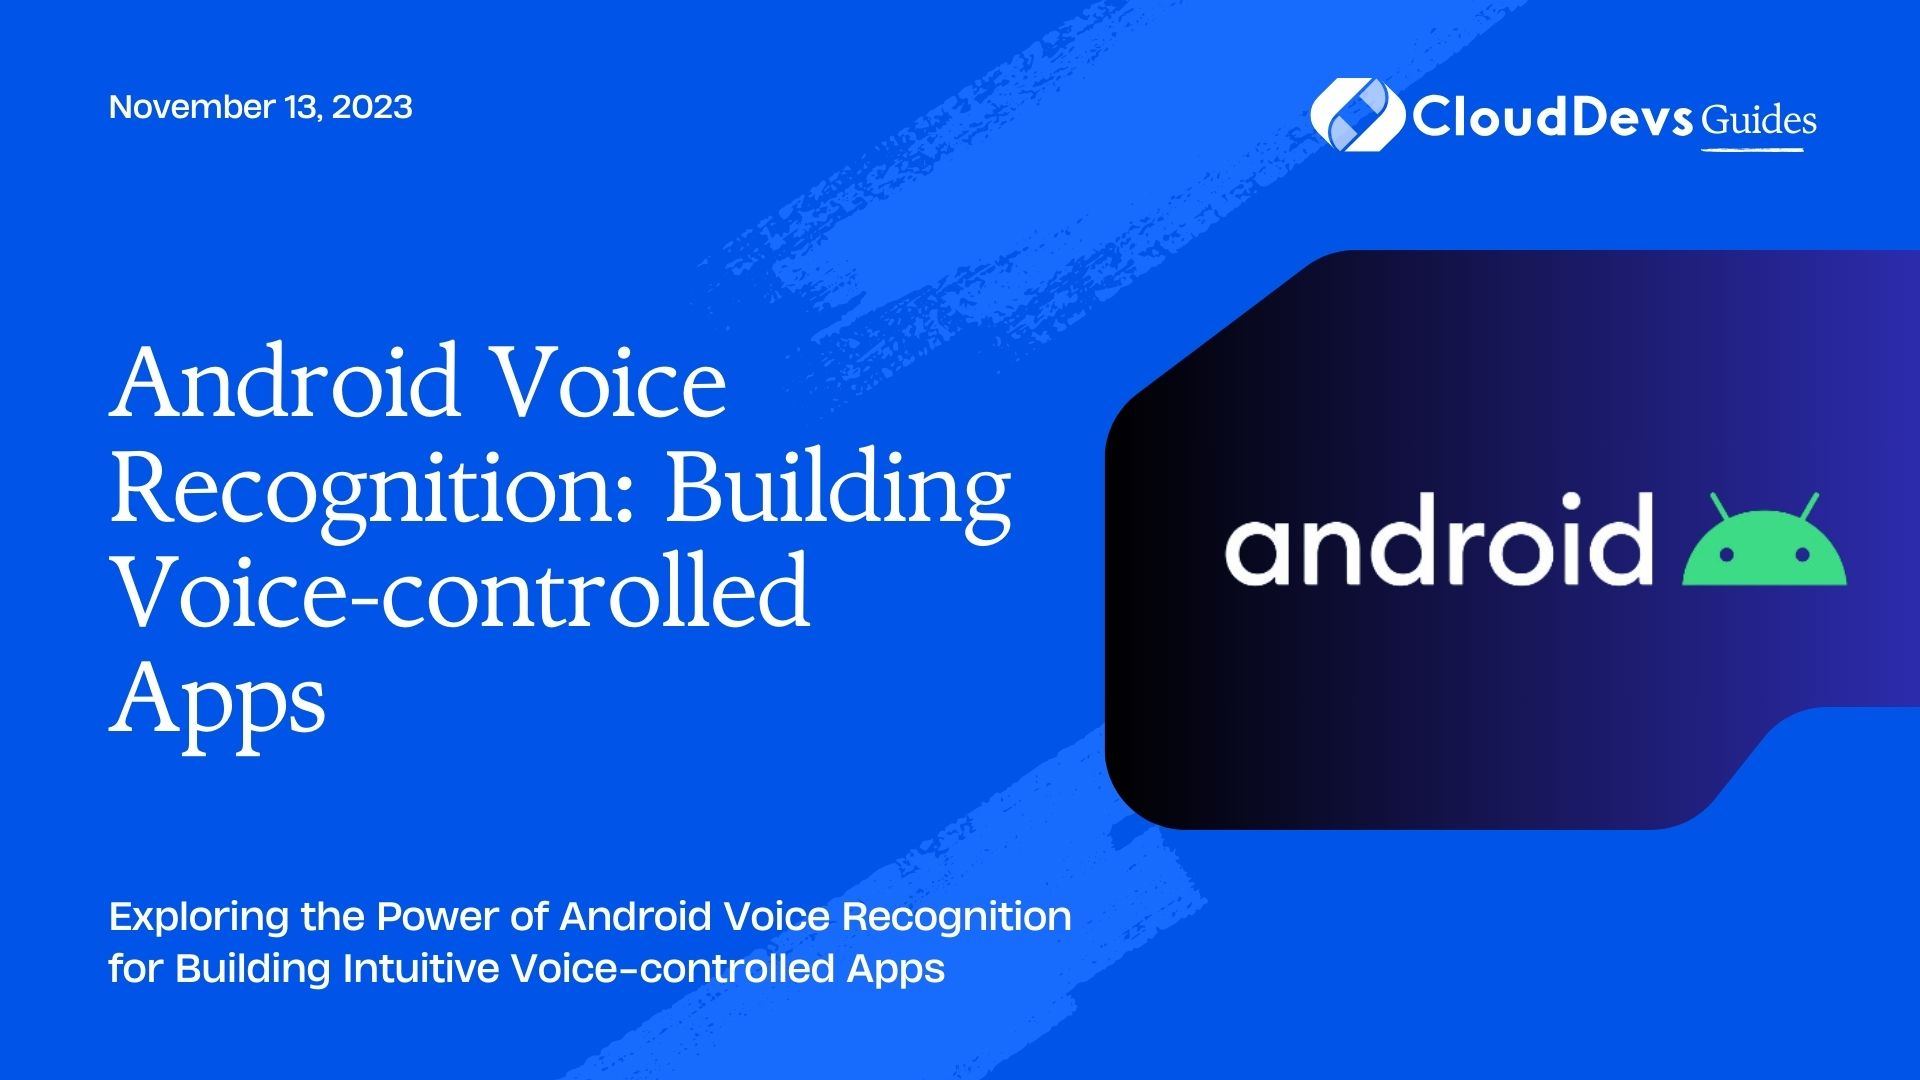 Android Voice Recognition: Building Voice-controlled Apps